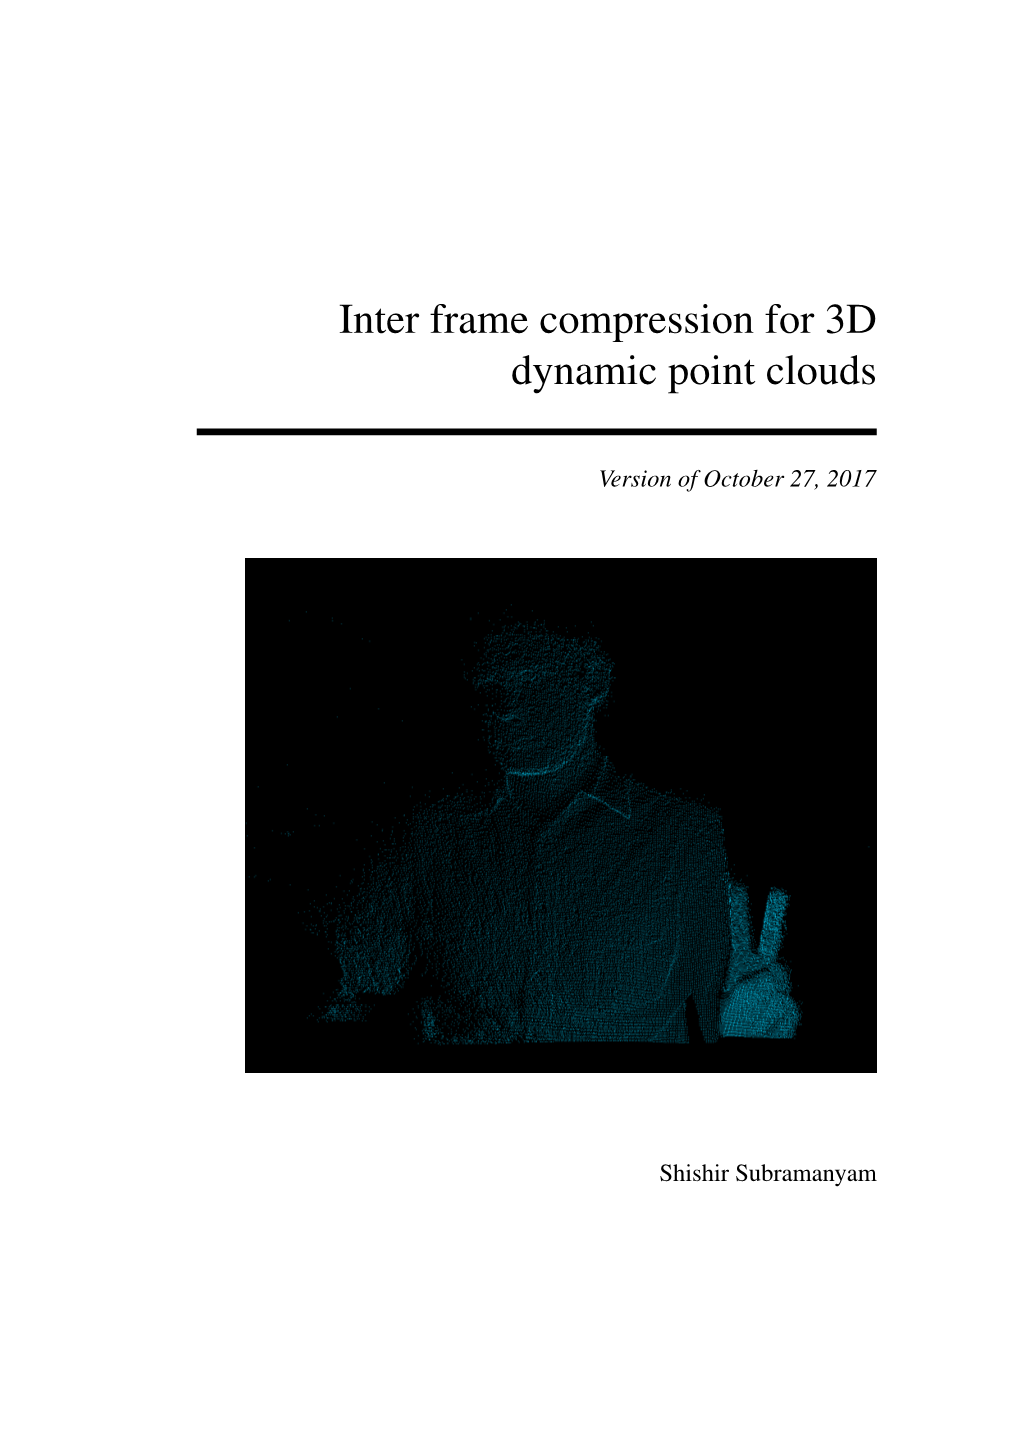 Inter Frame Compression for 3D Dynamic Point Clouds